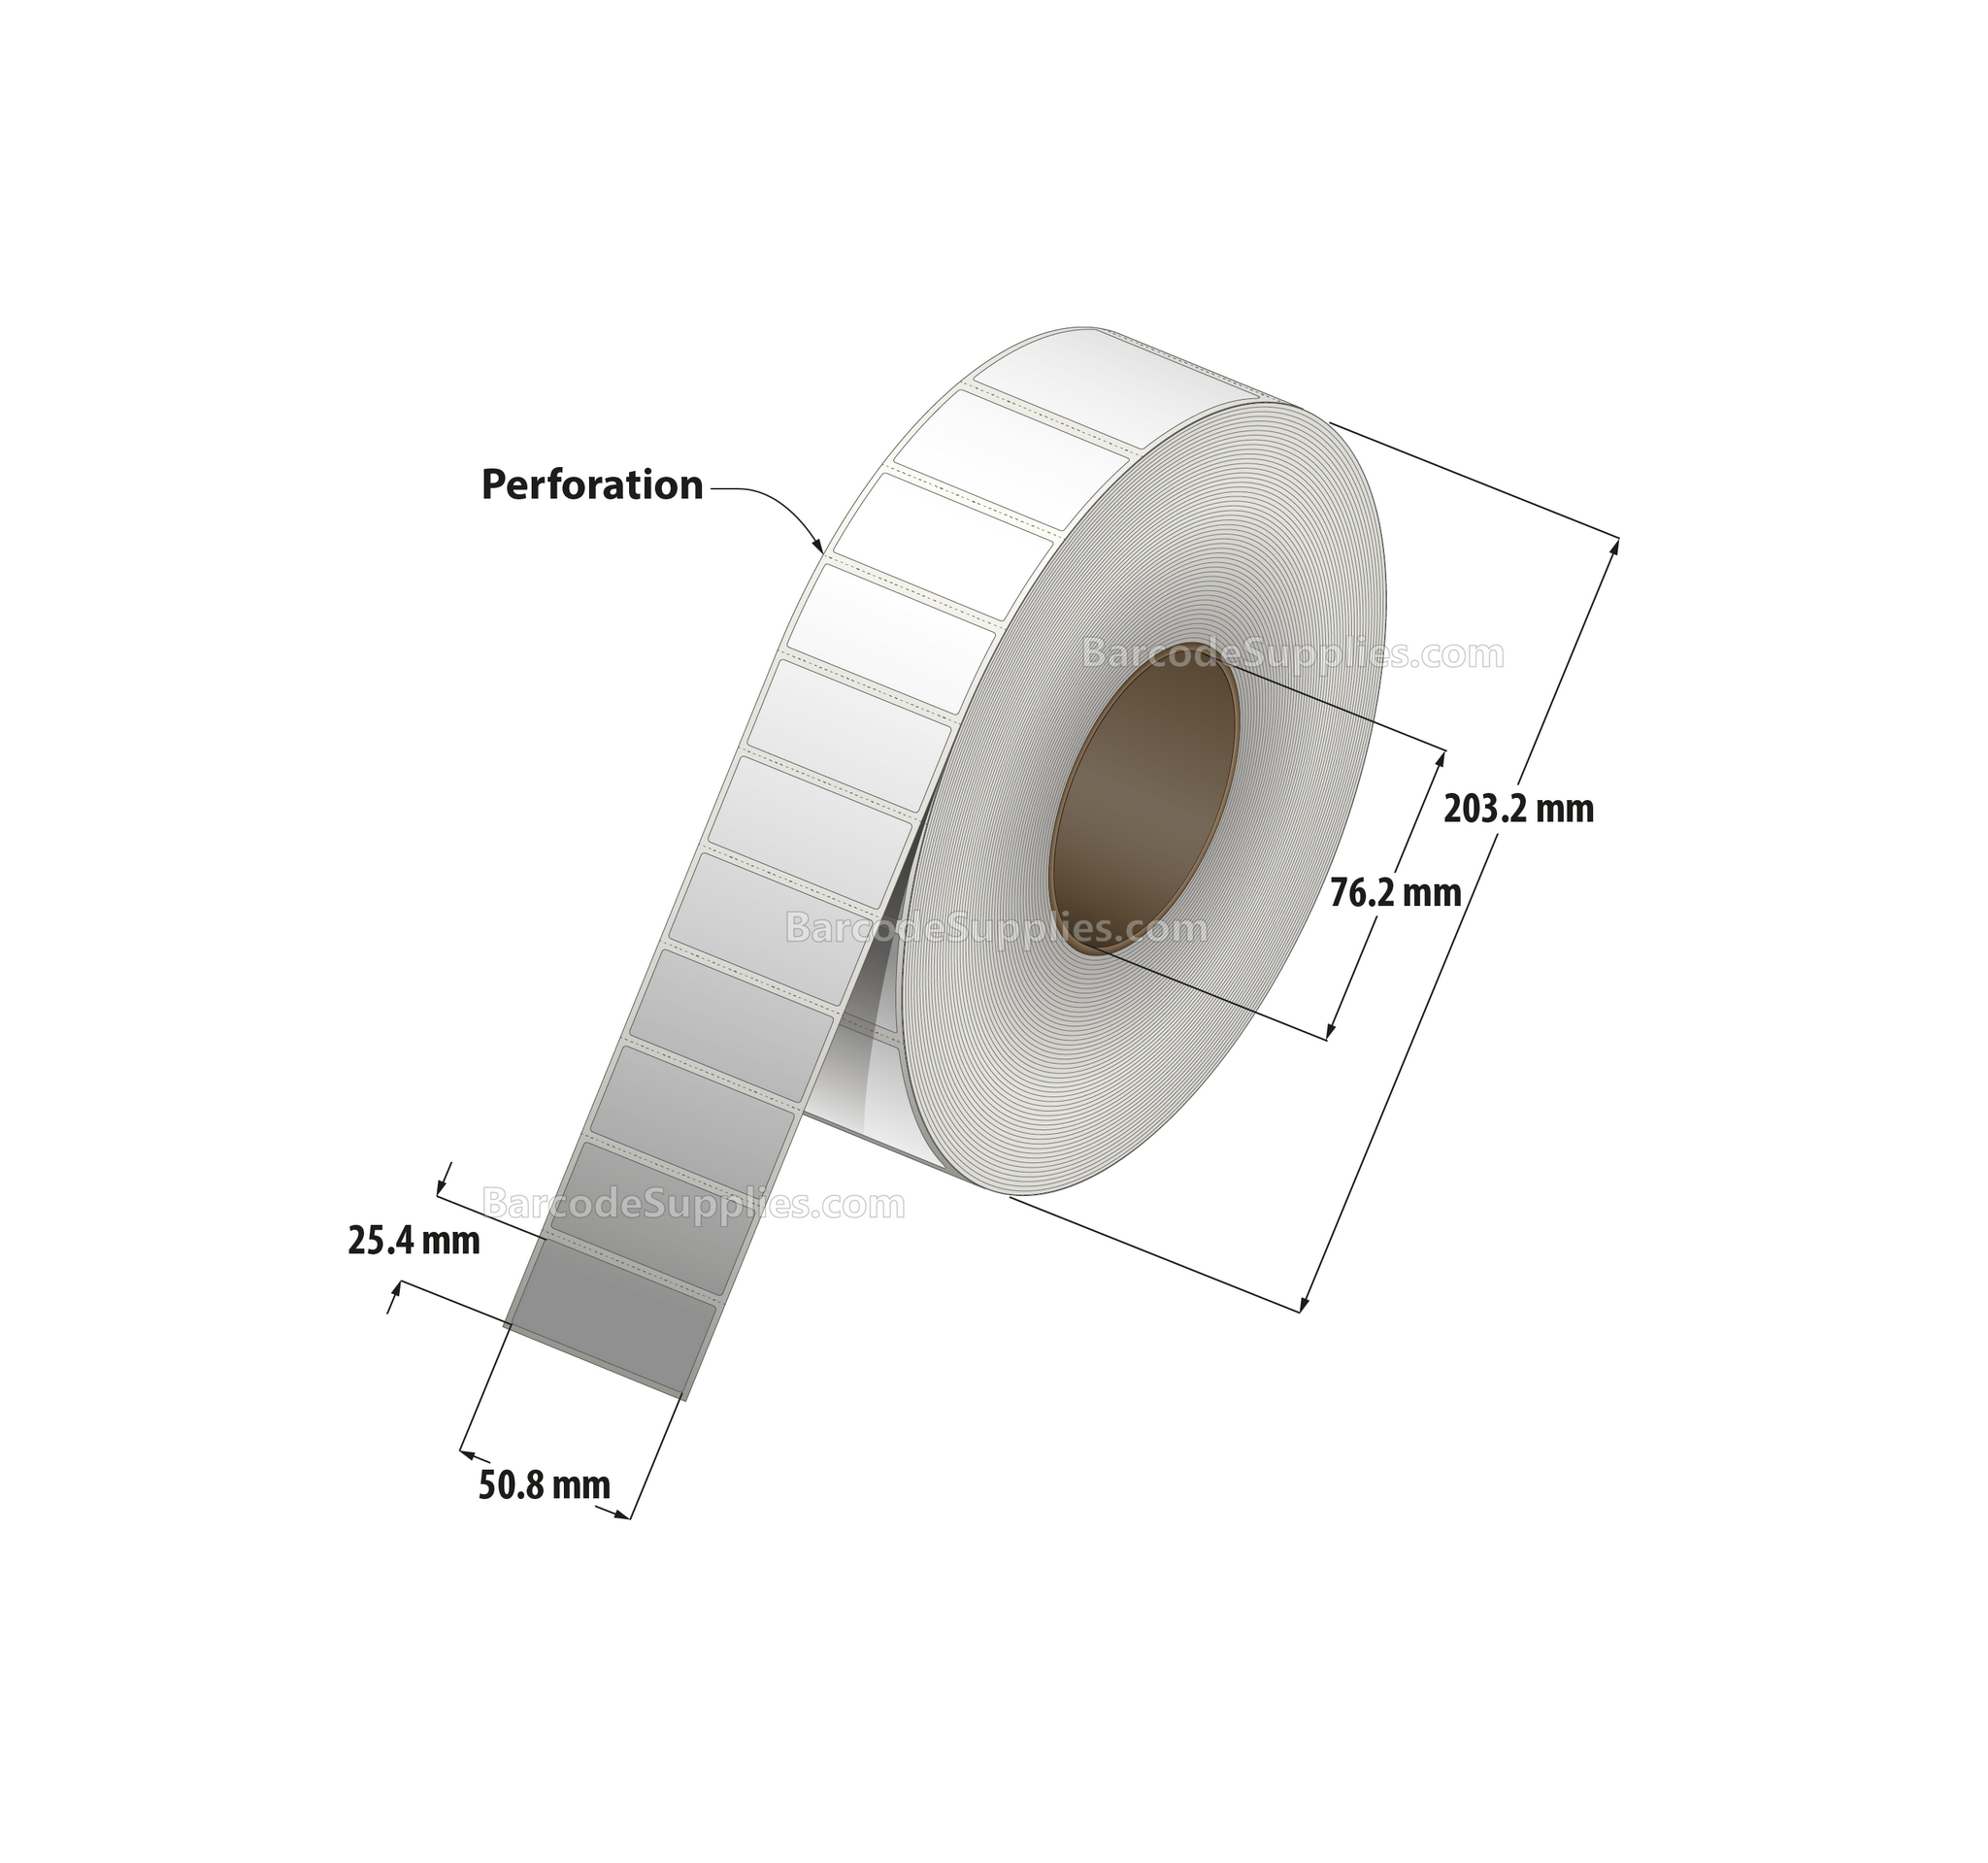 2 x 1 Direct Thermal White Labels With Permanent Acrylic Adhesive - Perforated - 5500 Labels Per Roll - Carton Of 8 Rolls - 44000 Labels Total - MPN: DT21-1P